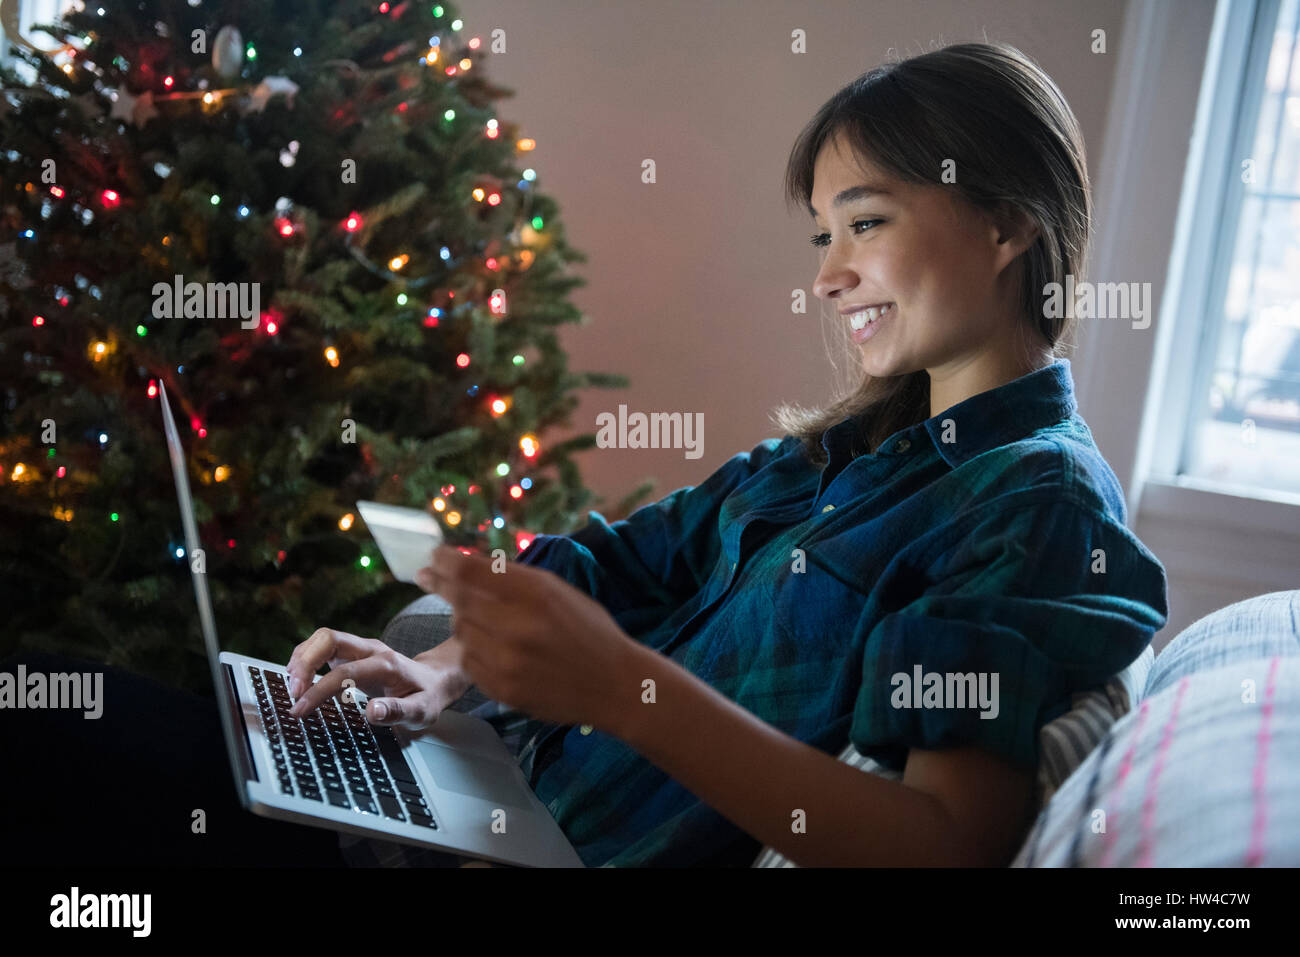 Mixed Race woman online shopping with laptop near Christmas tree Stock Photo